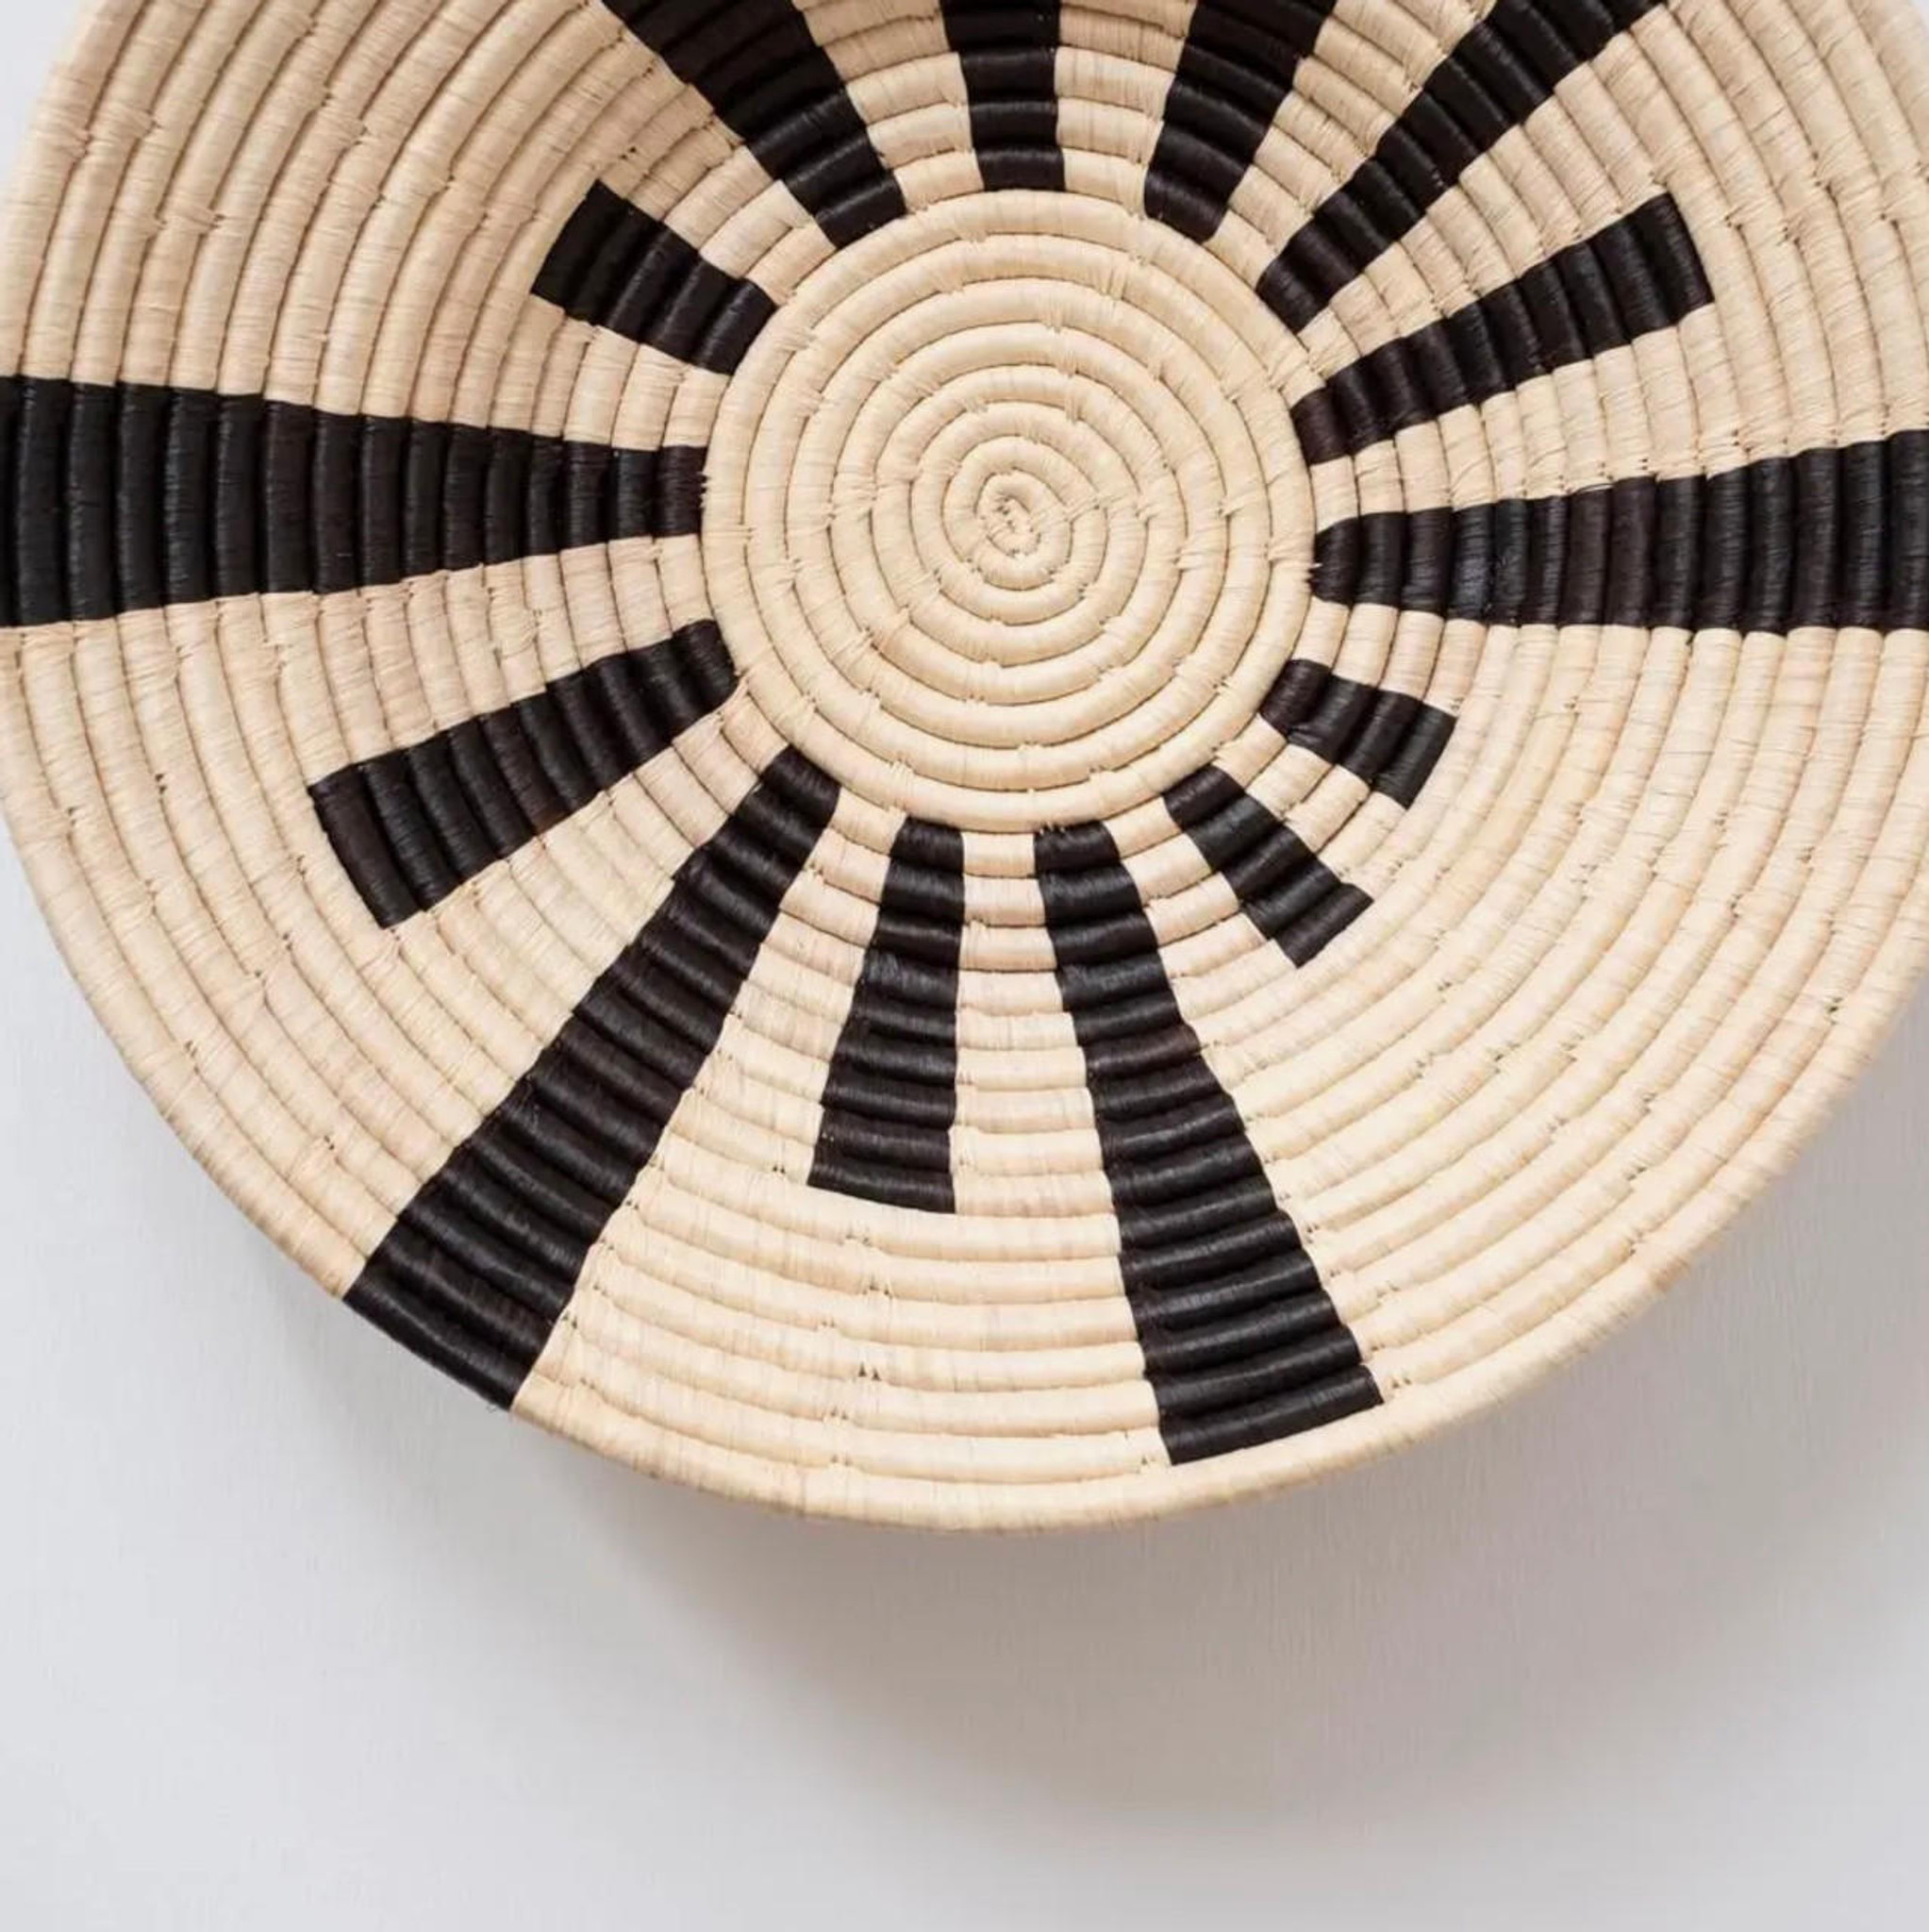 Large Warp Speed Basket - A stunning collection of baskets on display or elevate your tablescape with a unique centerpiece. A simple yet bold basket from our Black & Natural collection. Handcrafted by women artisans living in Central Uganda who are part of a cooperative that provides employment and training for disadvantaged or marginalized communities - particularly widows, the disabled and those living with HIV/AIDS.

* Made from all natural, sustainably sourced raffia and banana fibers * All synthetic AZO free dyes * Hanging loop on back allows basket to be wall decor in addition to tabletop use * Weavers hand make each basket from home while tending to other household duties | Details: Made in Uganda • Dimensions: 18″ x 18″ x 5″ (45.7 x 45.7 x 12.7 cm) • Weight: 2.5 lb (1.1 kg)